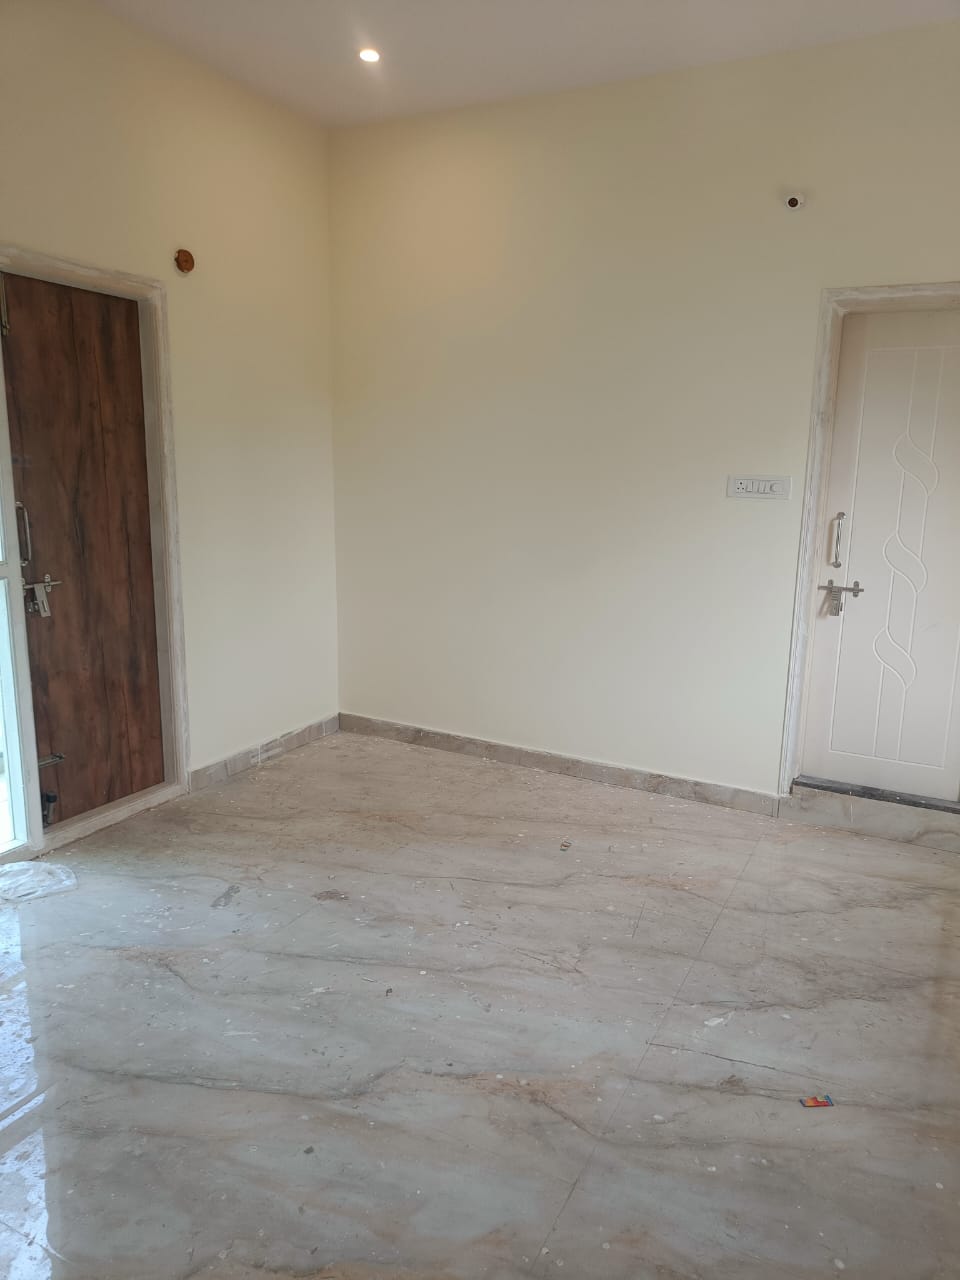 2 BHK Independent House for Lease Only at JAML2 - 2485 in Okalipuram